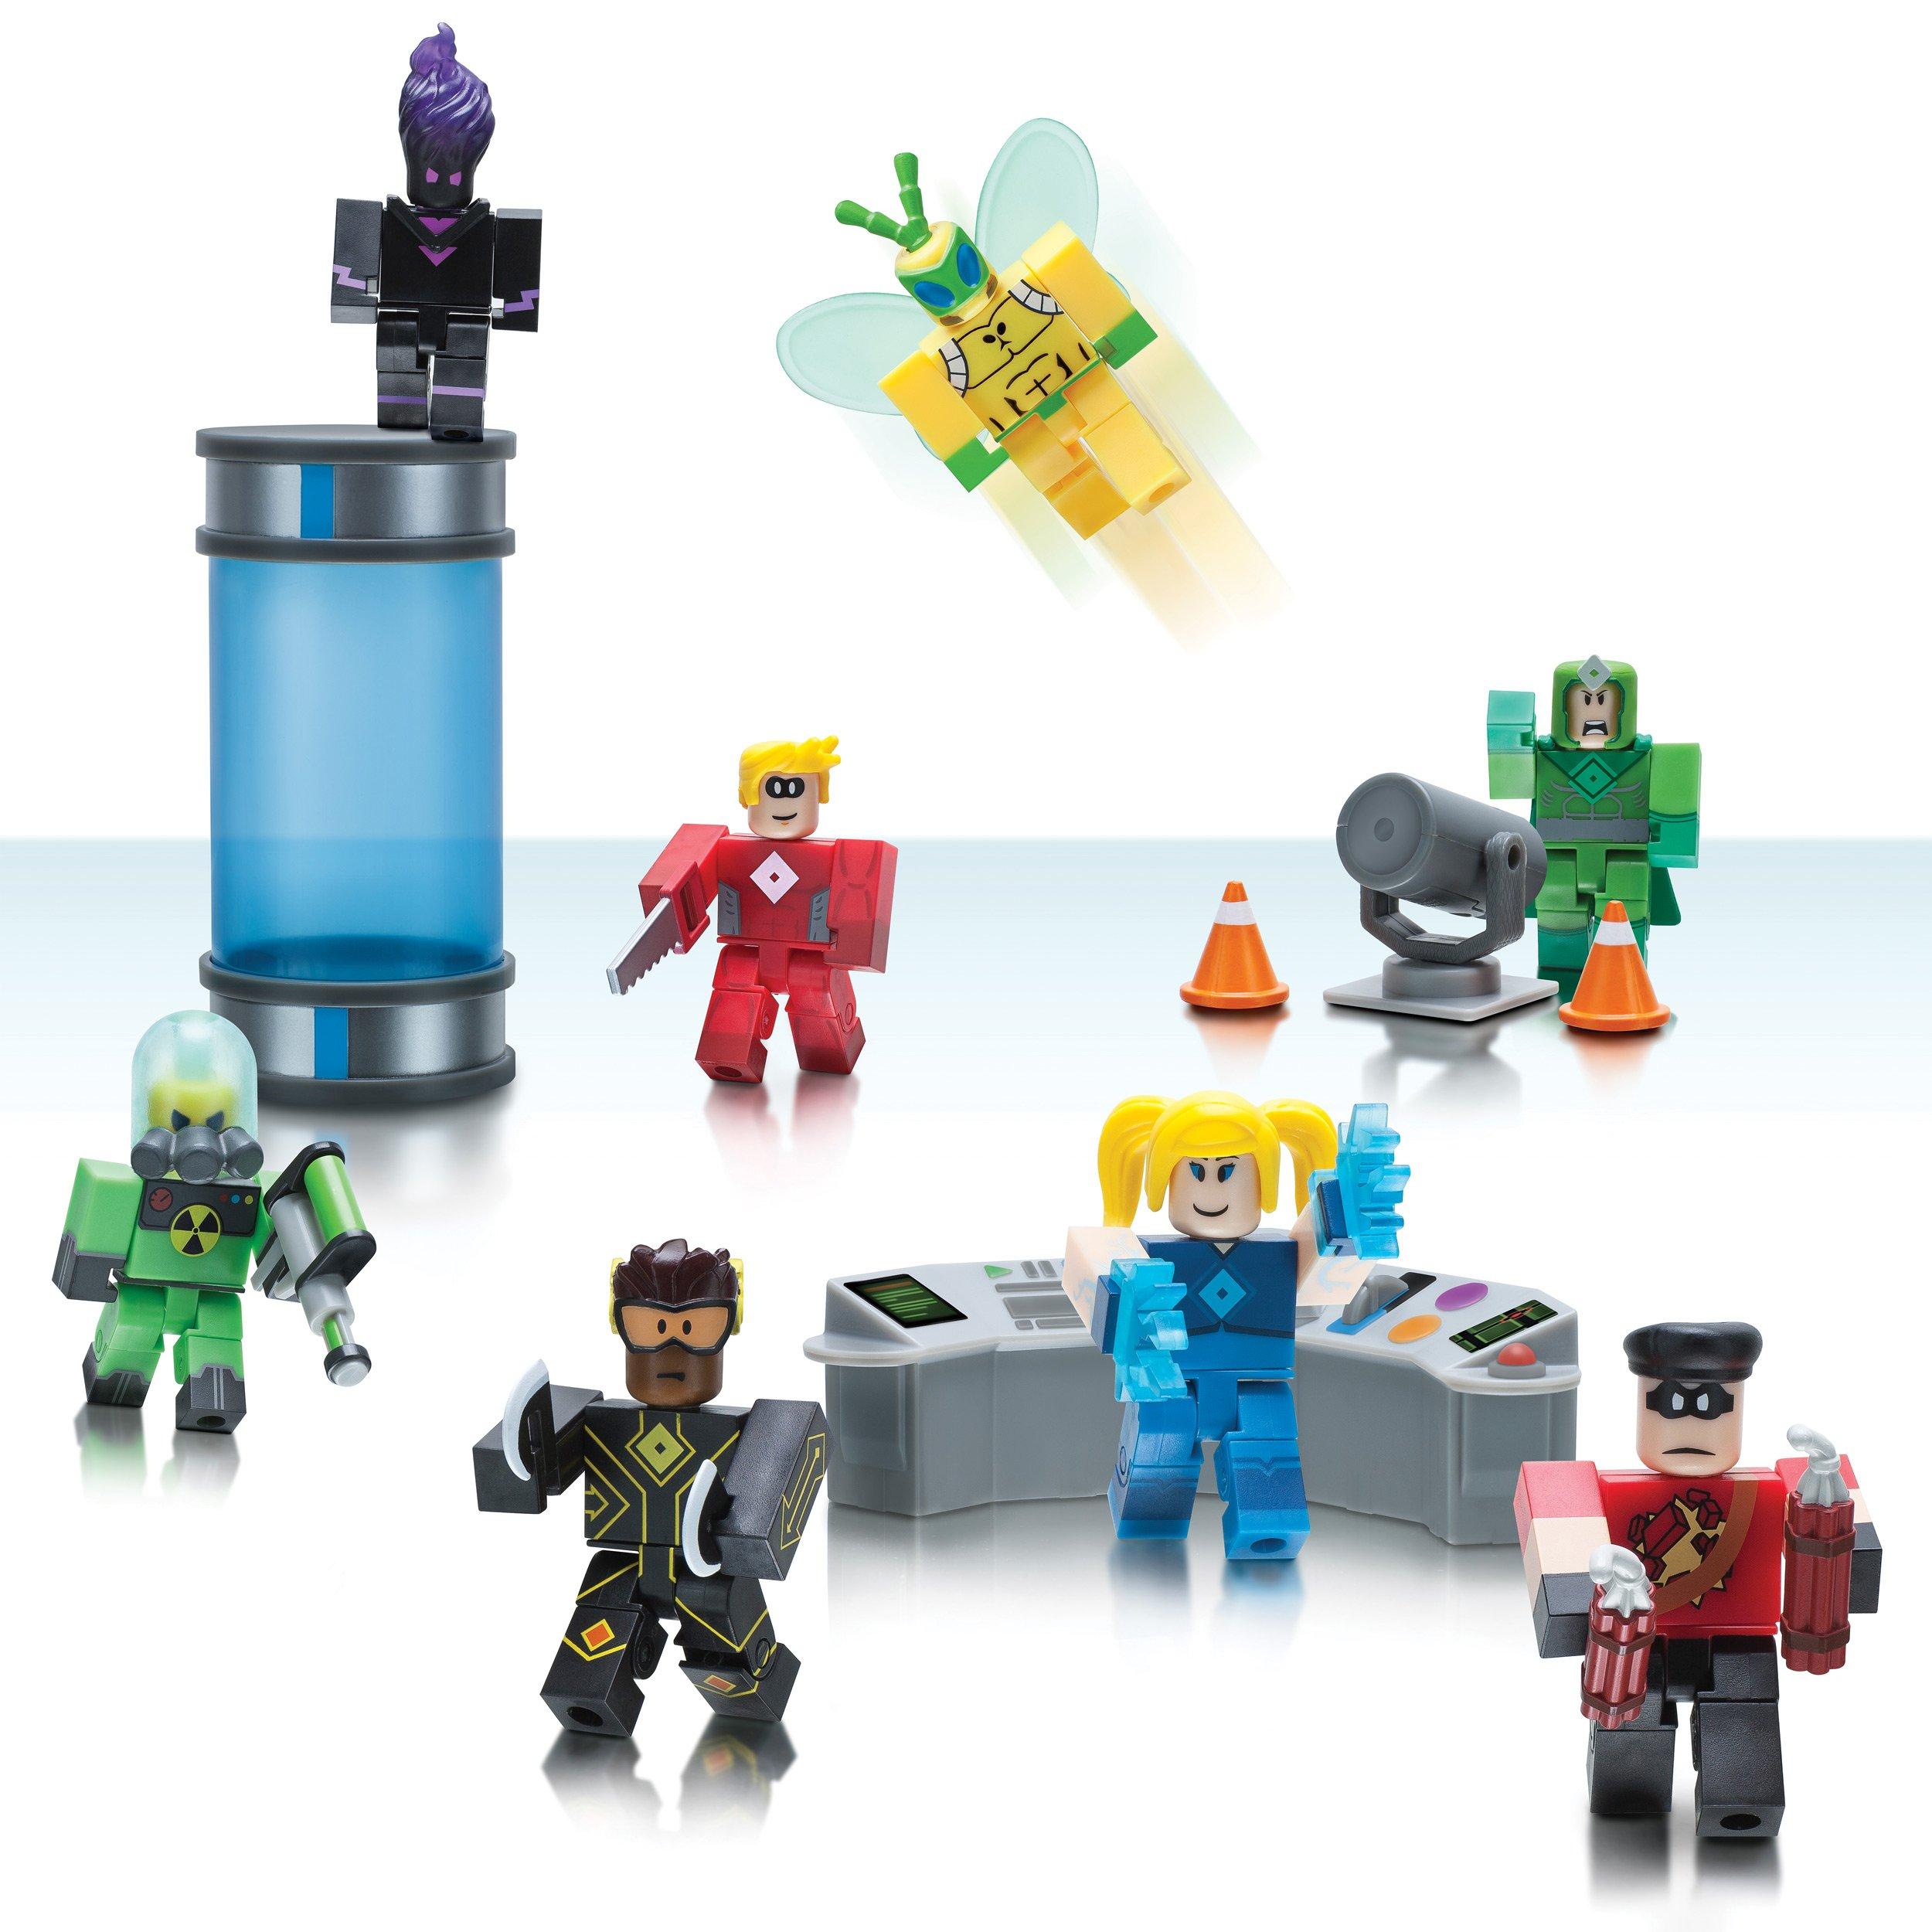 Roblox Heroes Of Robloxia Action Figure Set Gamestop - 35 best roblox images action figures roblox codes roblox